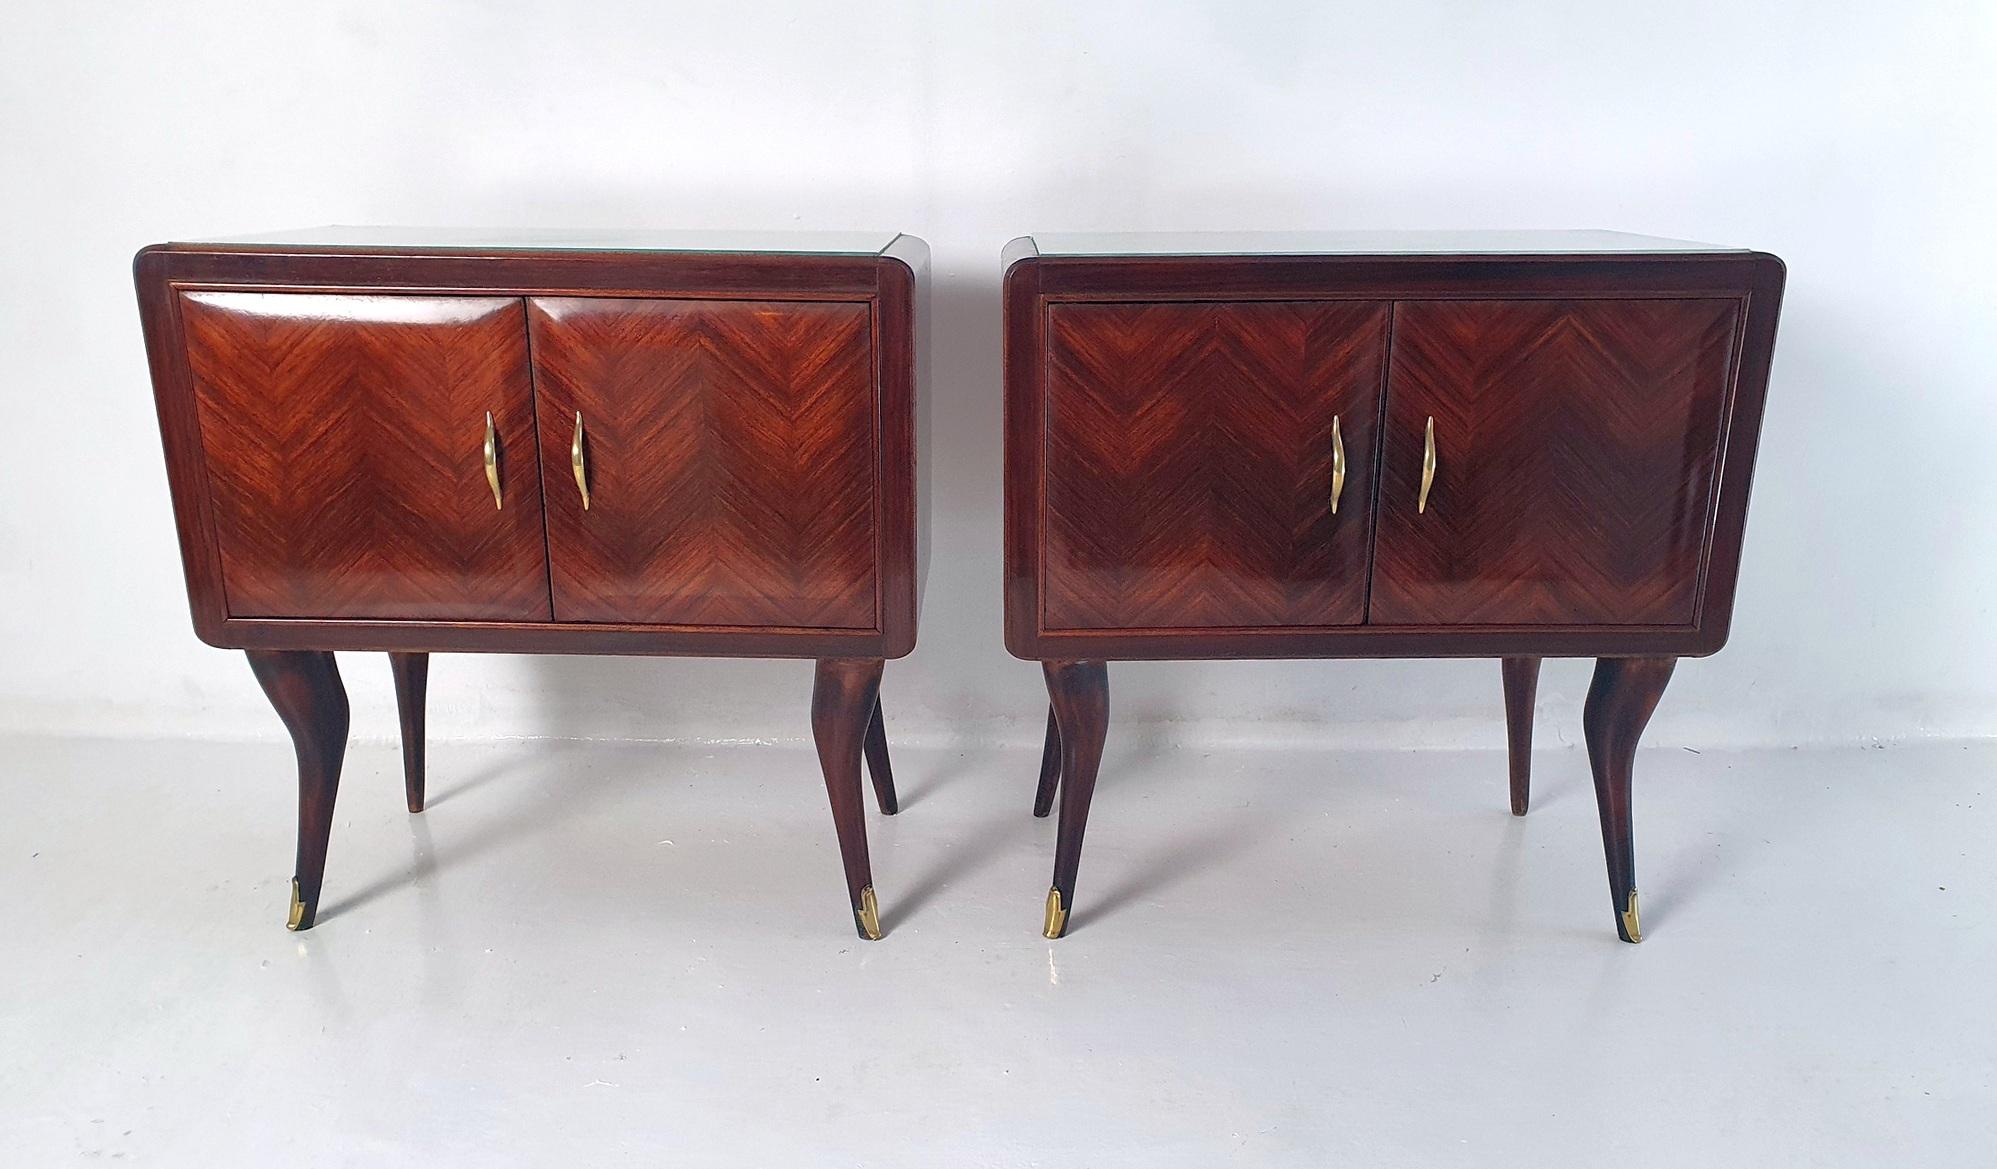 Listen up folks, I've got a pair of Italian nightstands from the 1950s that will knock your socks off! These babies are in the style of Ico Parisi and are so high quality, they practically glow in the dark! We've got them professionally restored to